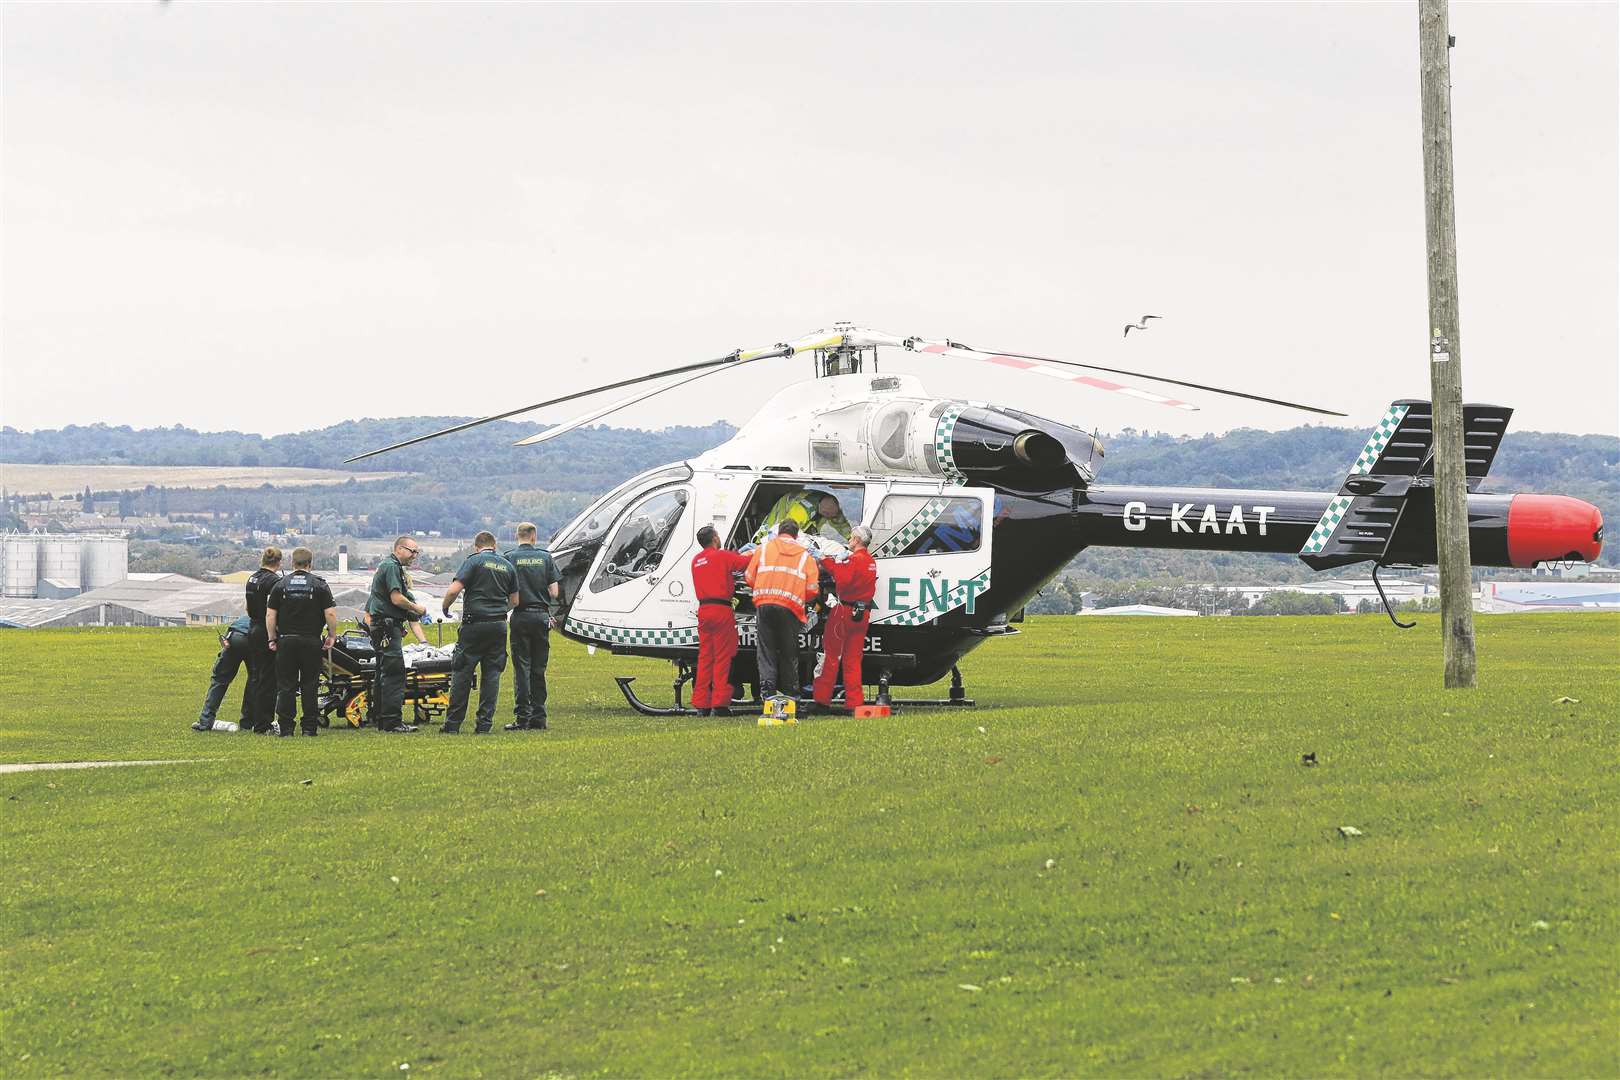 The air ambulance landed in Jackson's Field